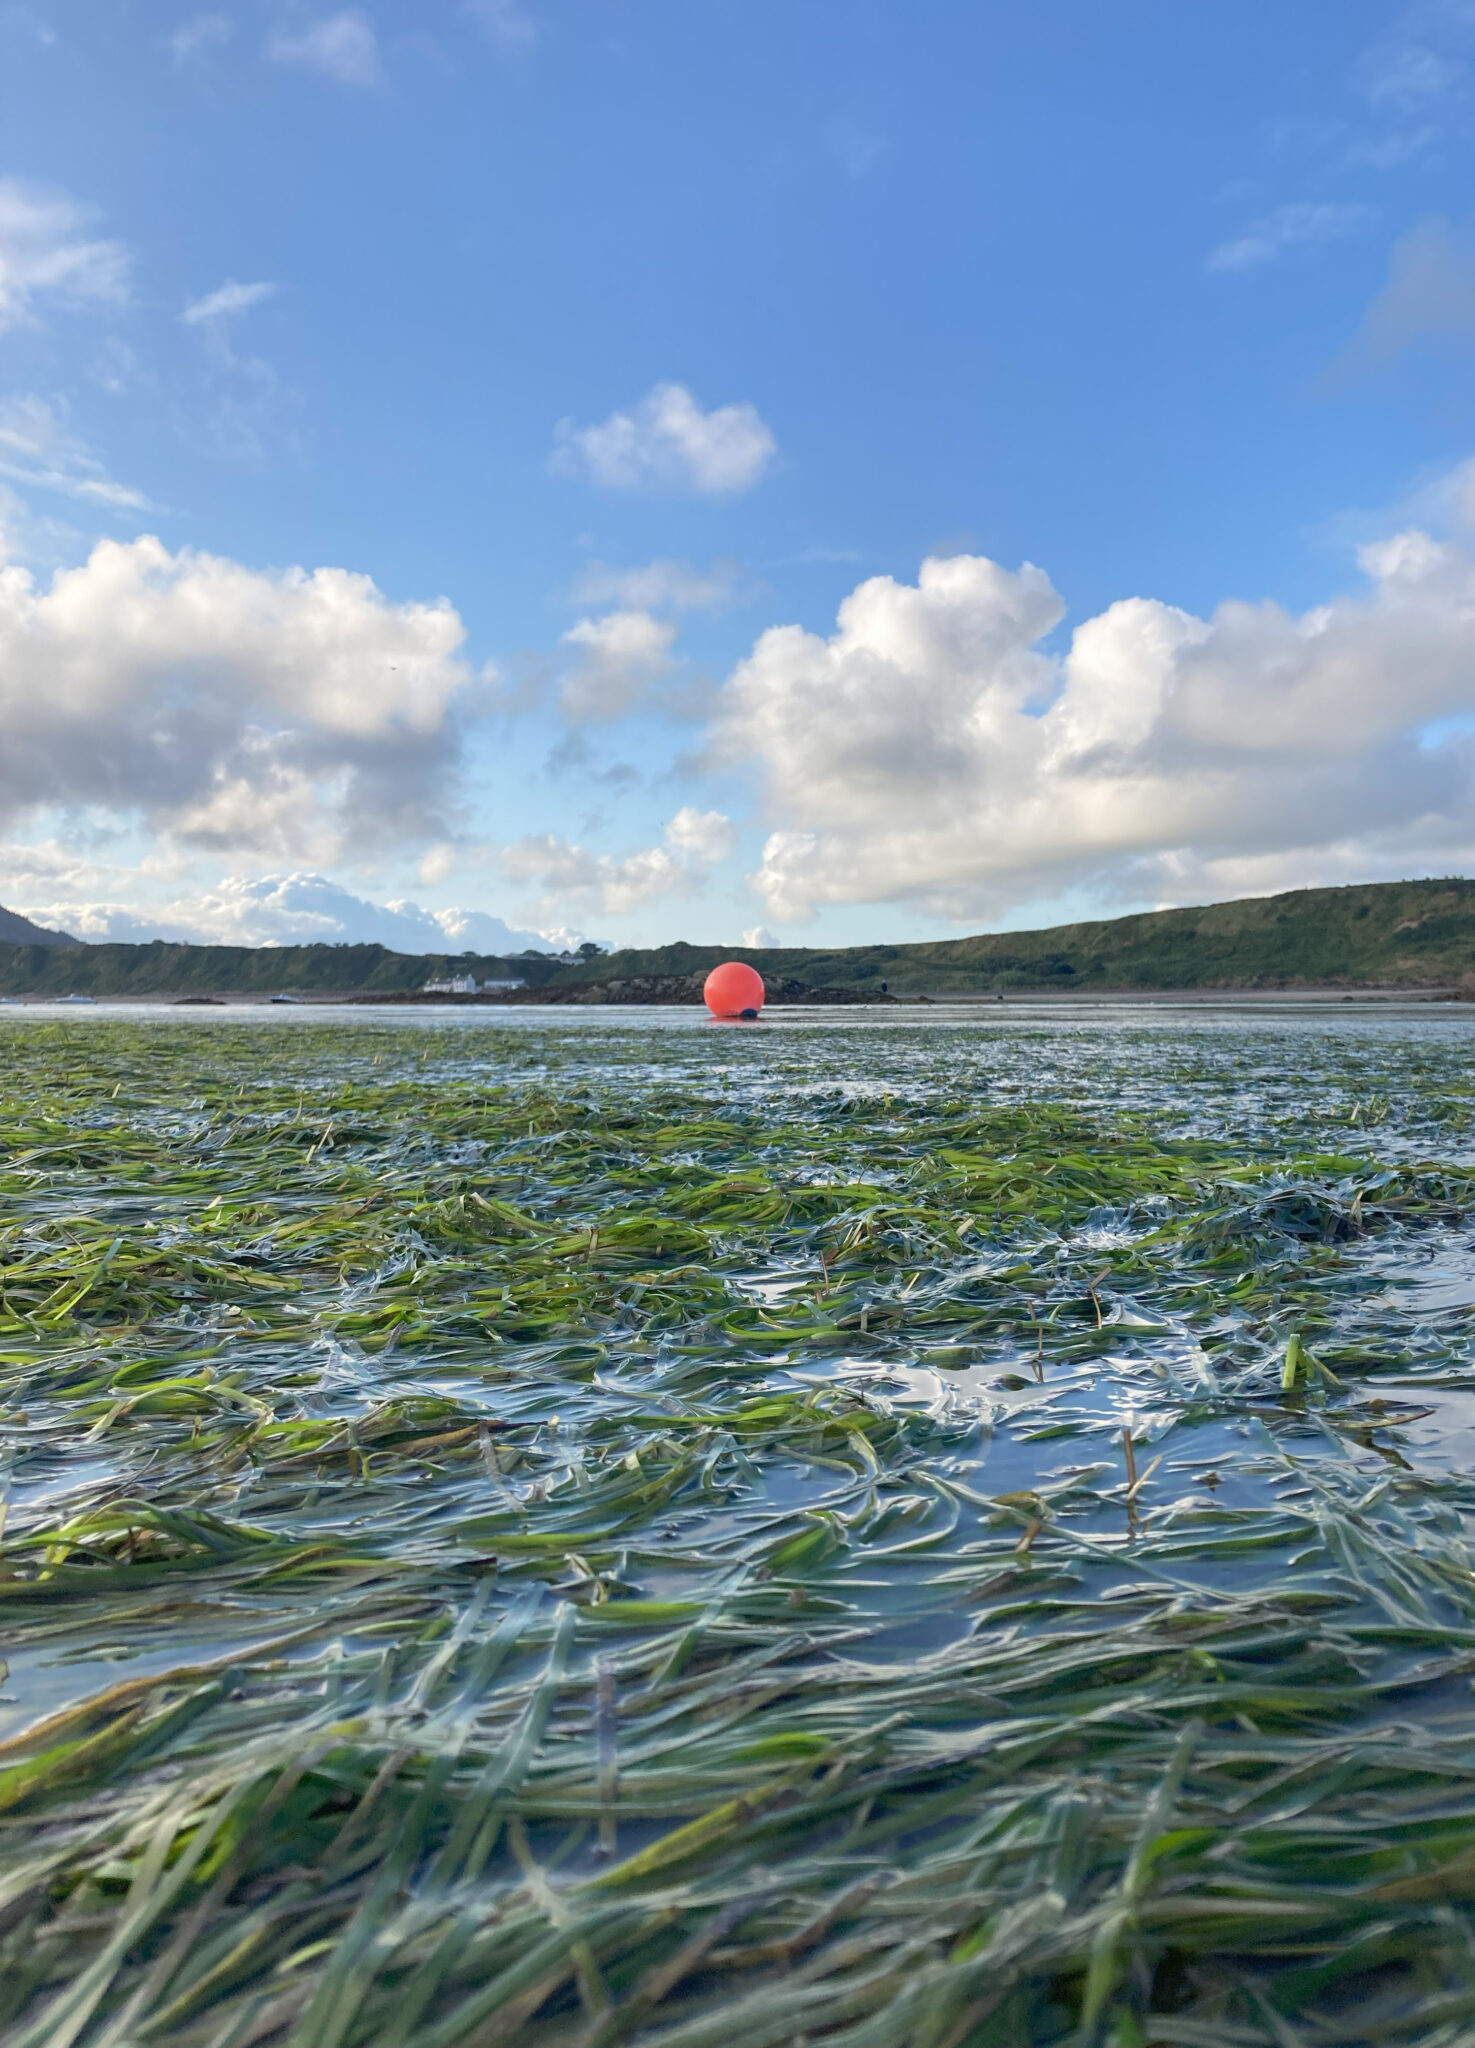 Seagrass floats on surface with buoy in background